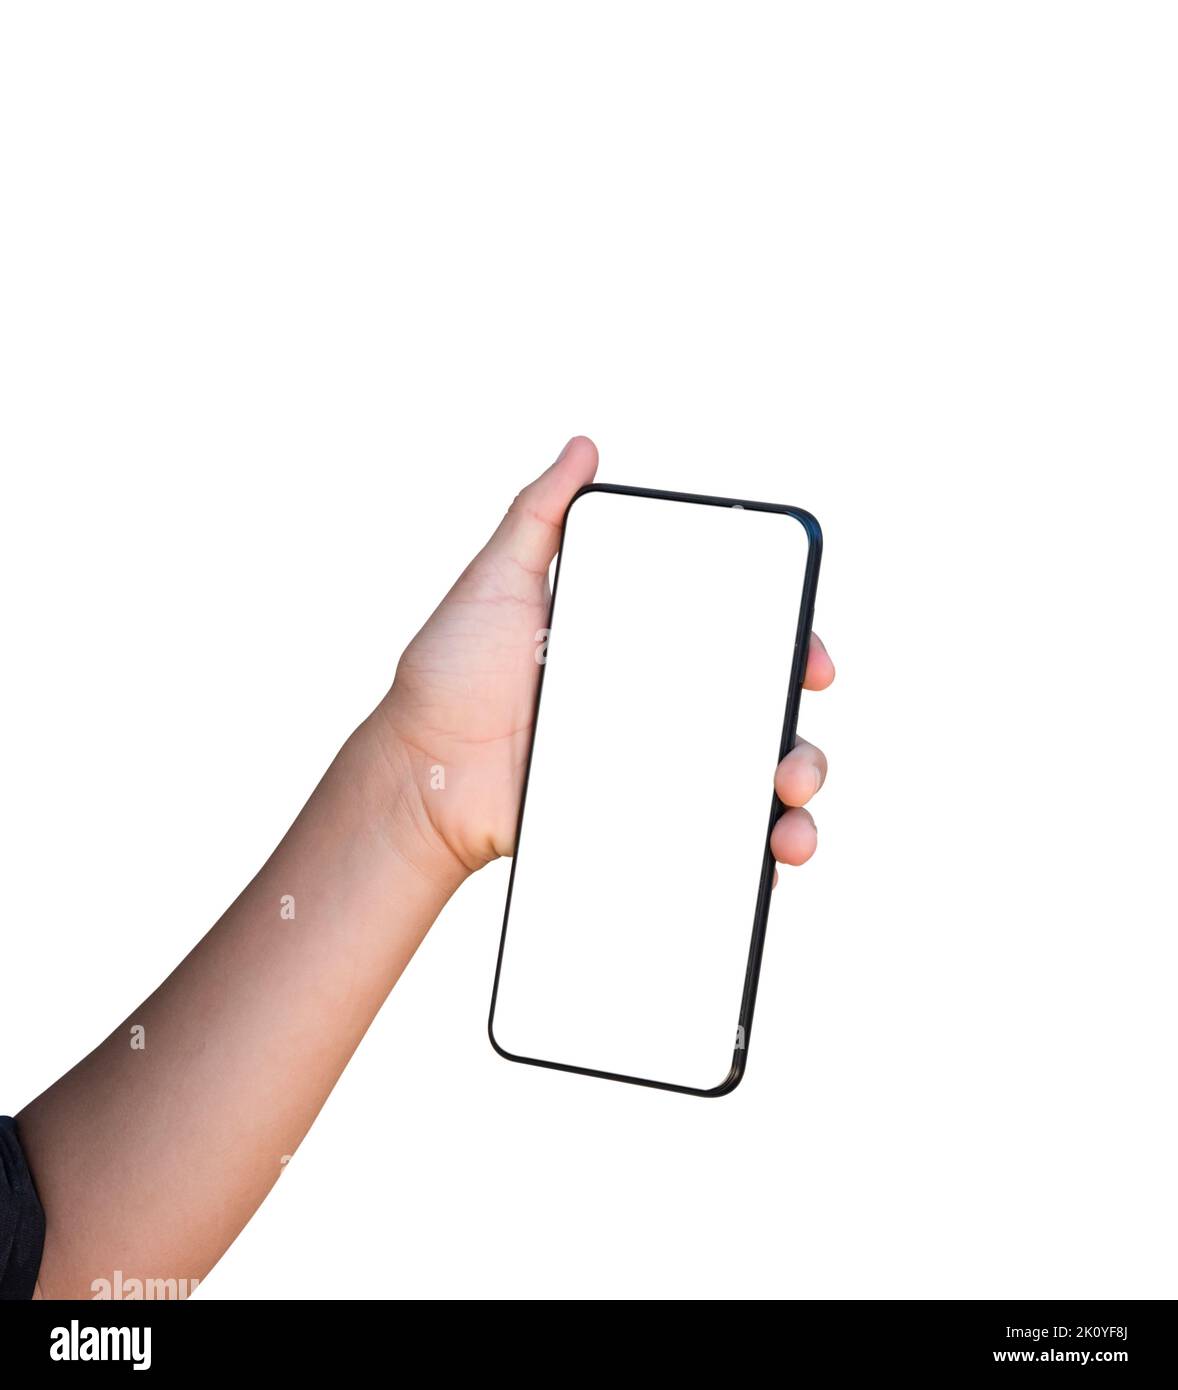 Child hand holding mobile phone isolated on white background. mock-up smartphone blank screen with clipping path Stock Photo